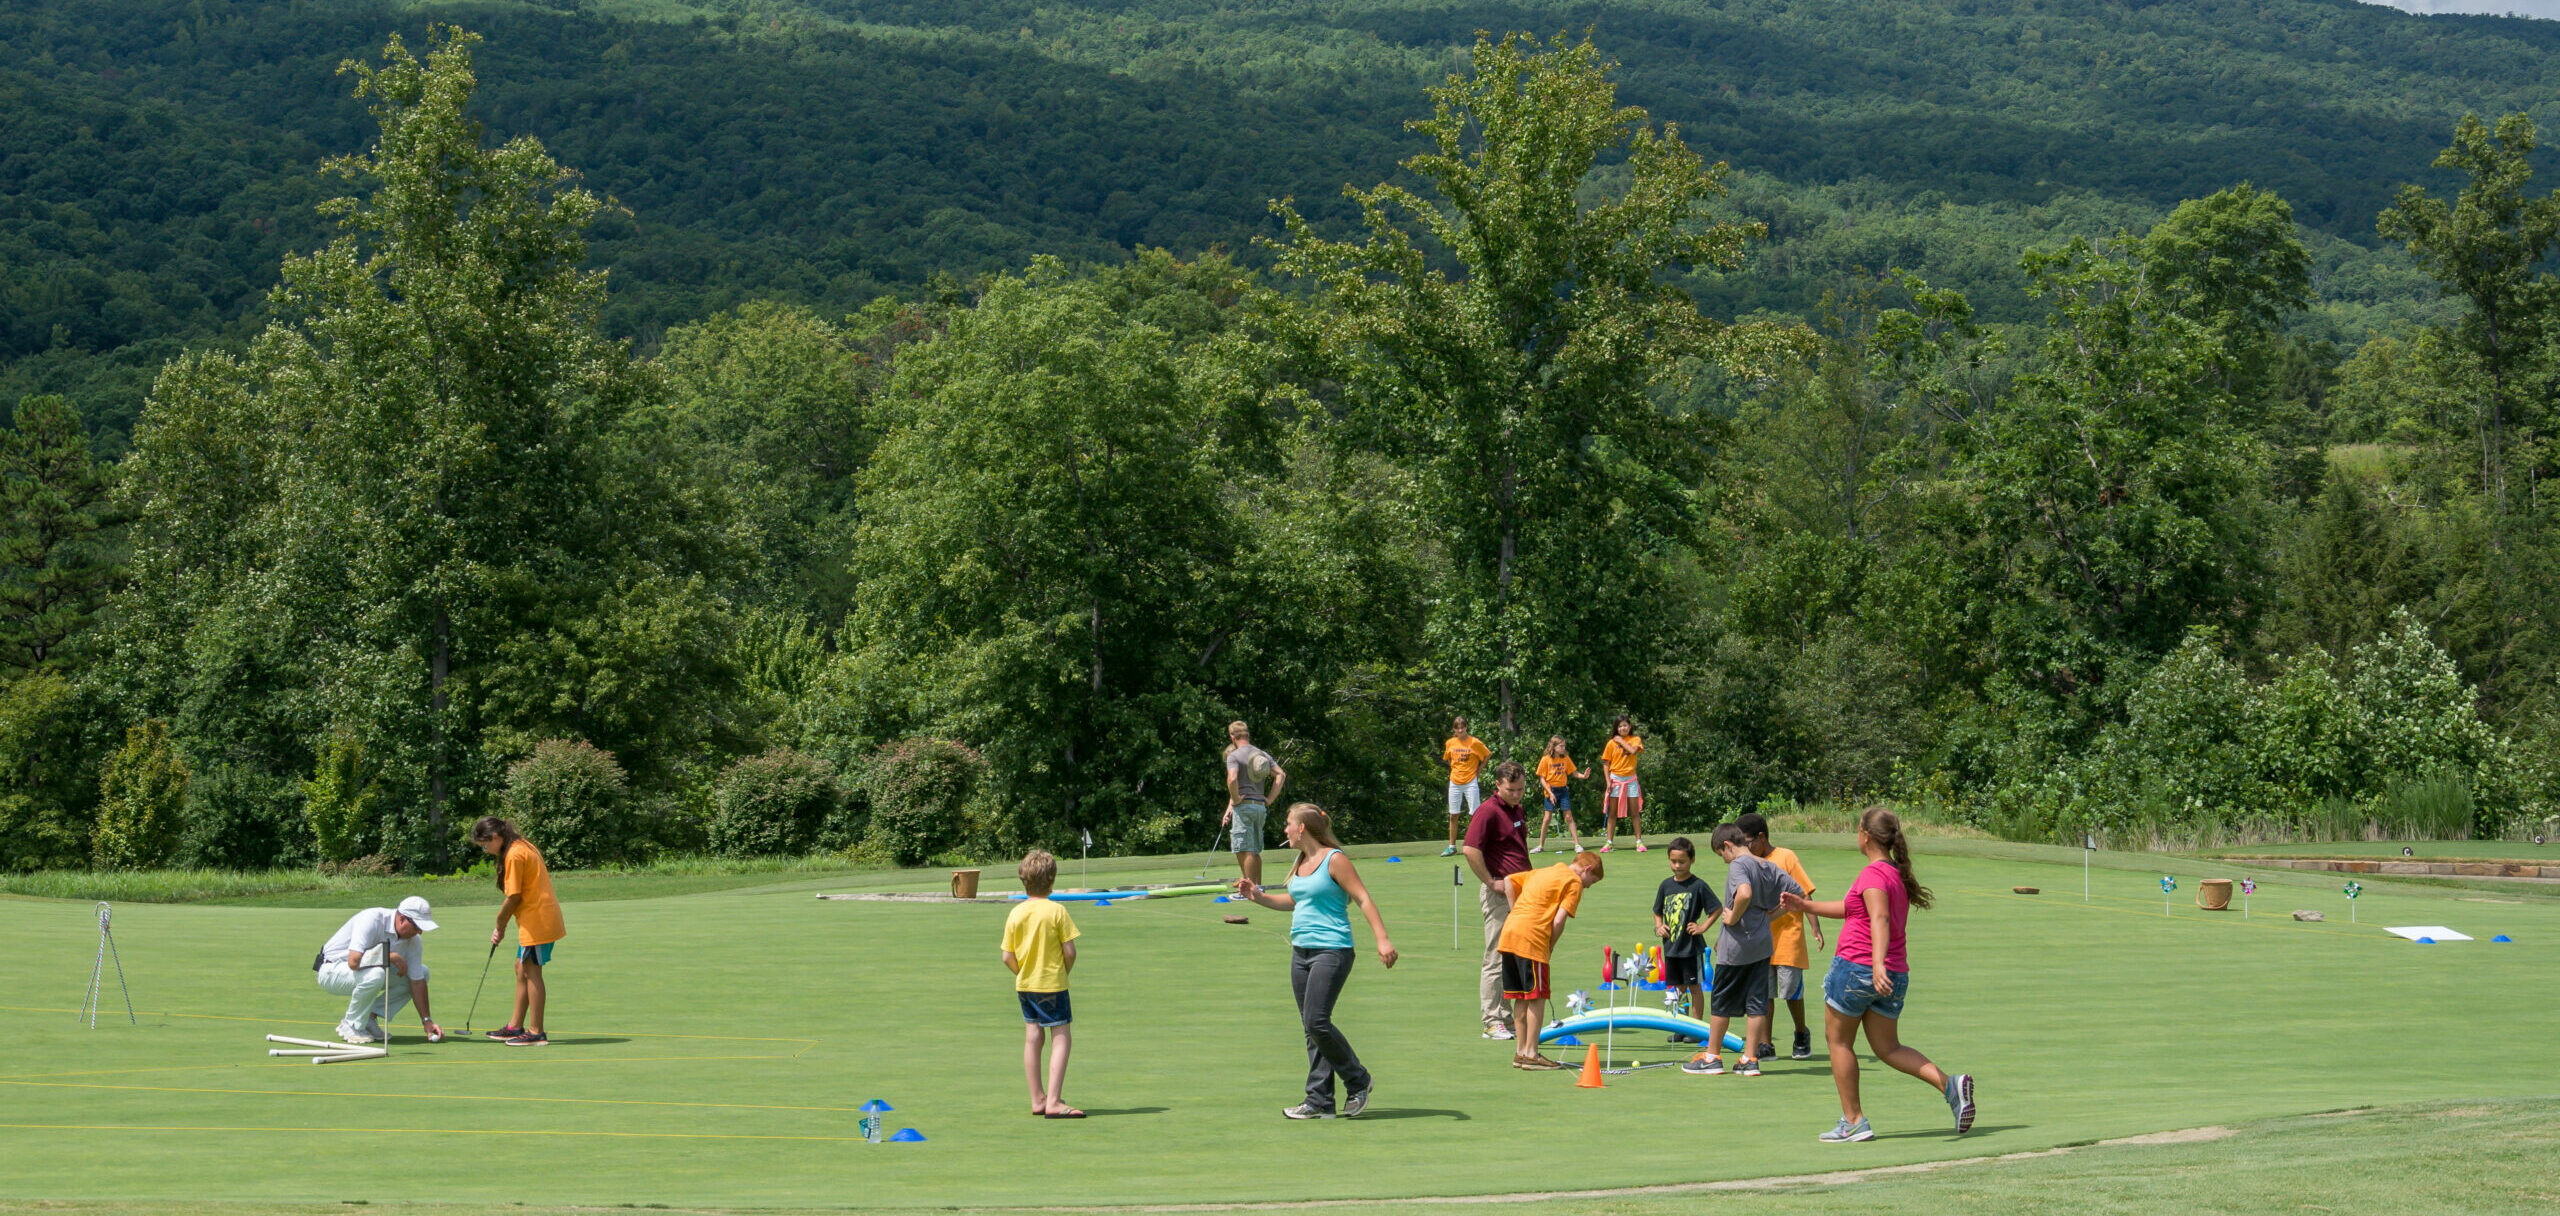 Golf lessons for kids at Bright's Creek Golf Club in Blue Ridge Mountains